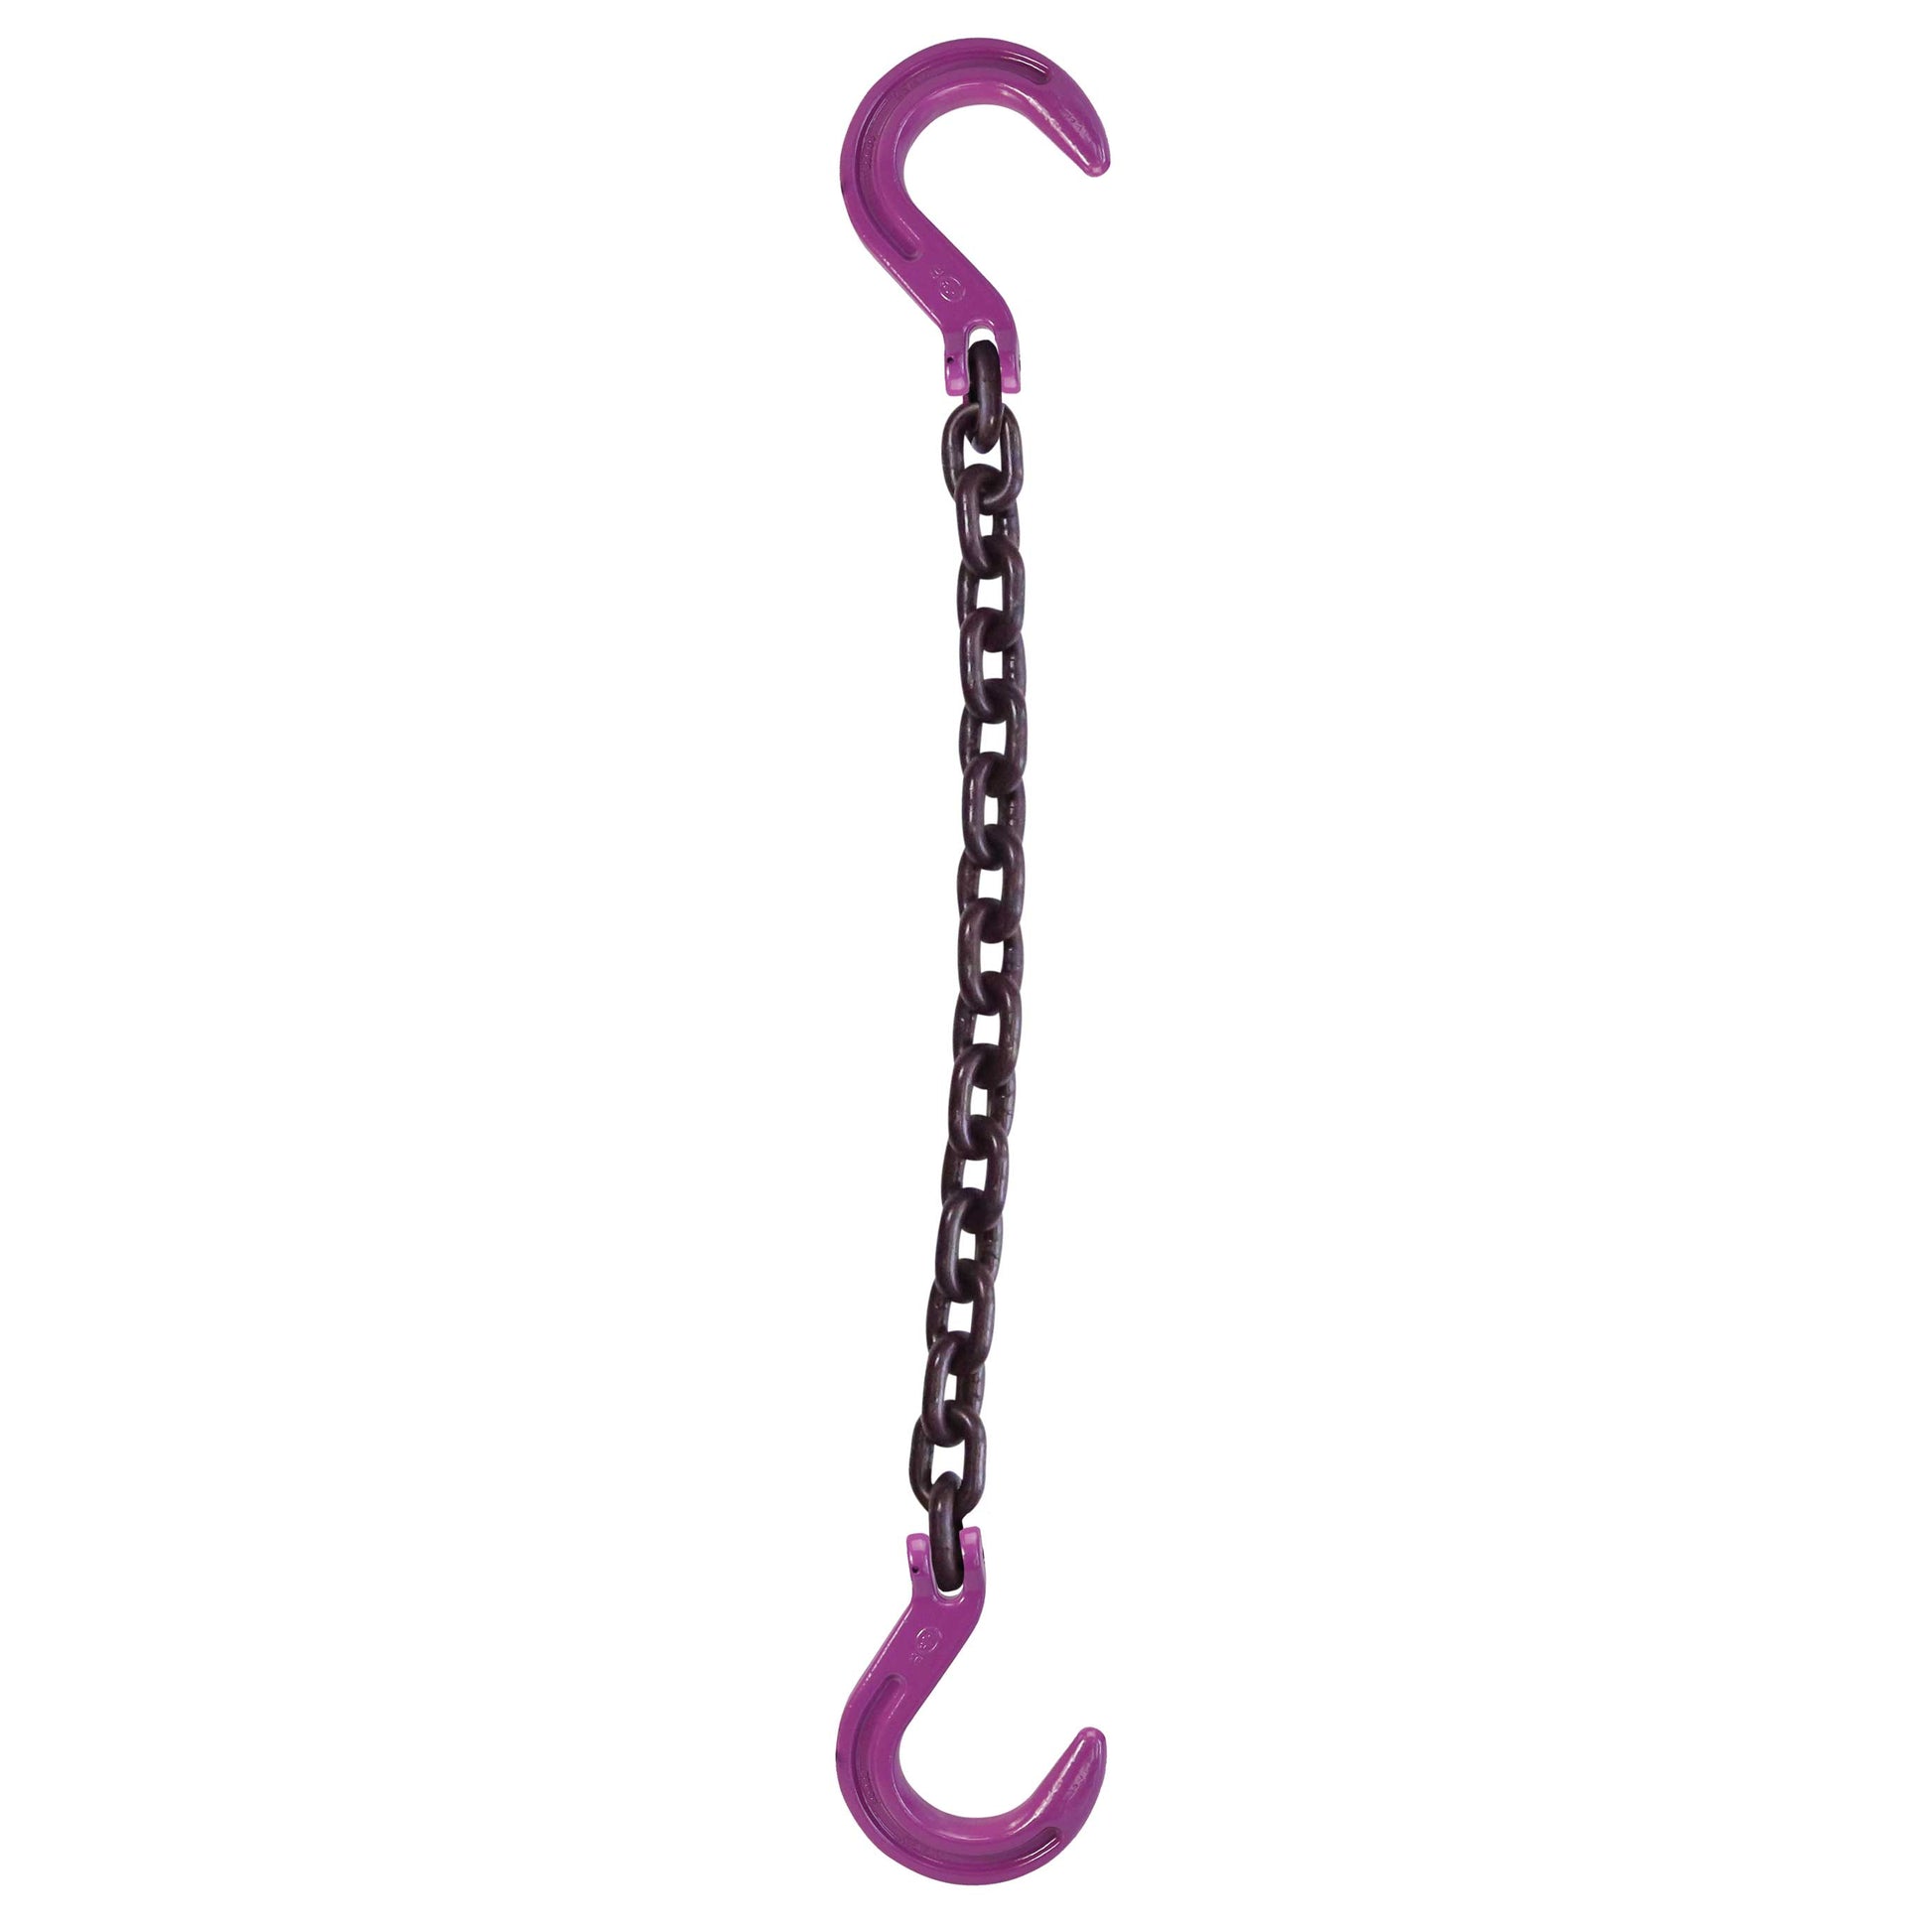 12 inch x 14 foot Single Leg Chain Sling w Foundry & Foundry Hooks Grade 100 image 1 of 2